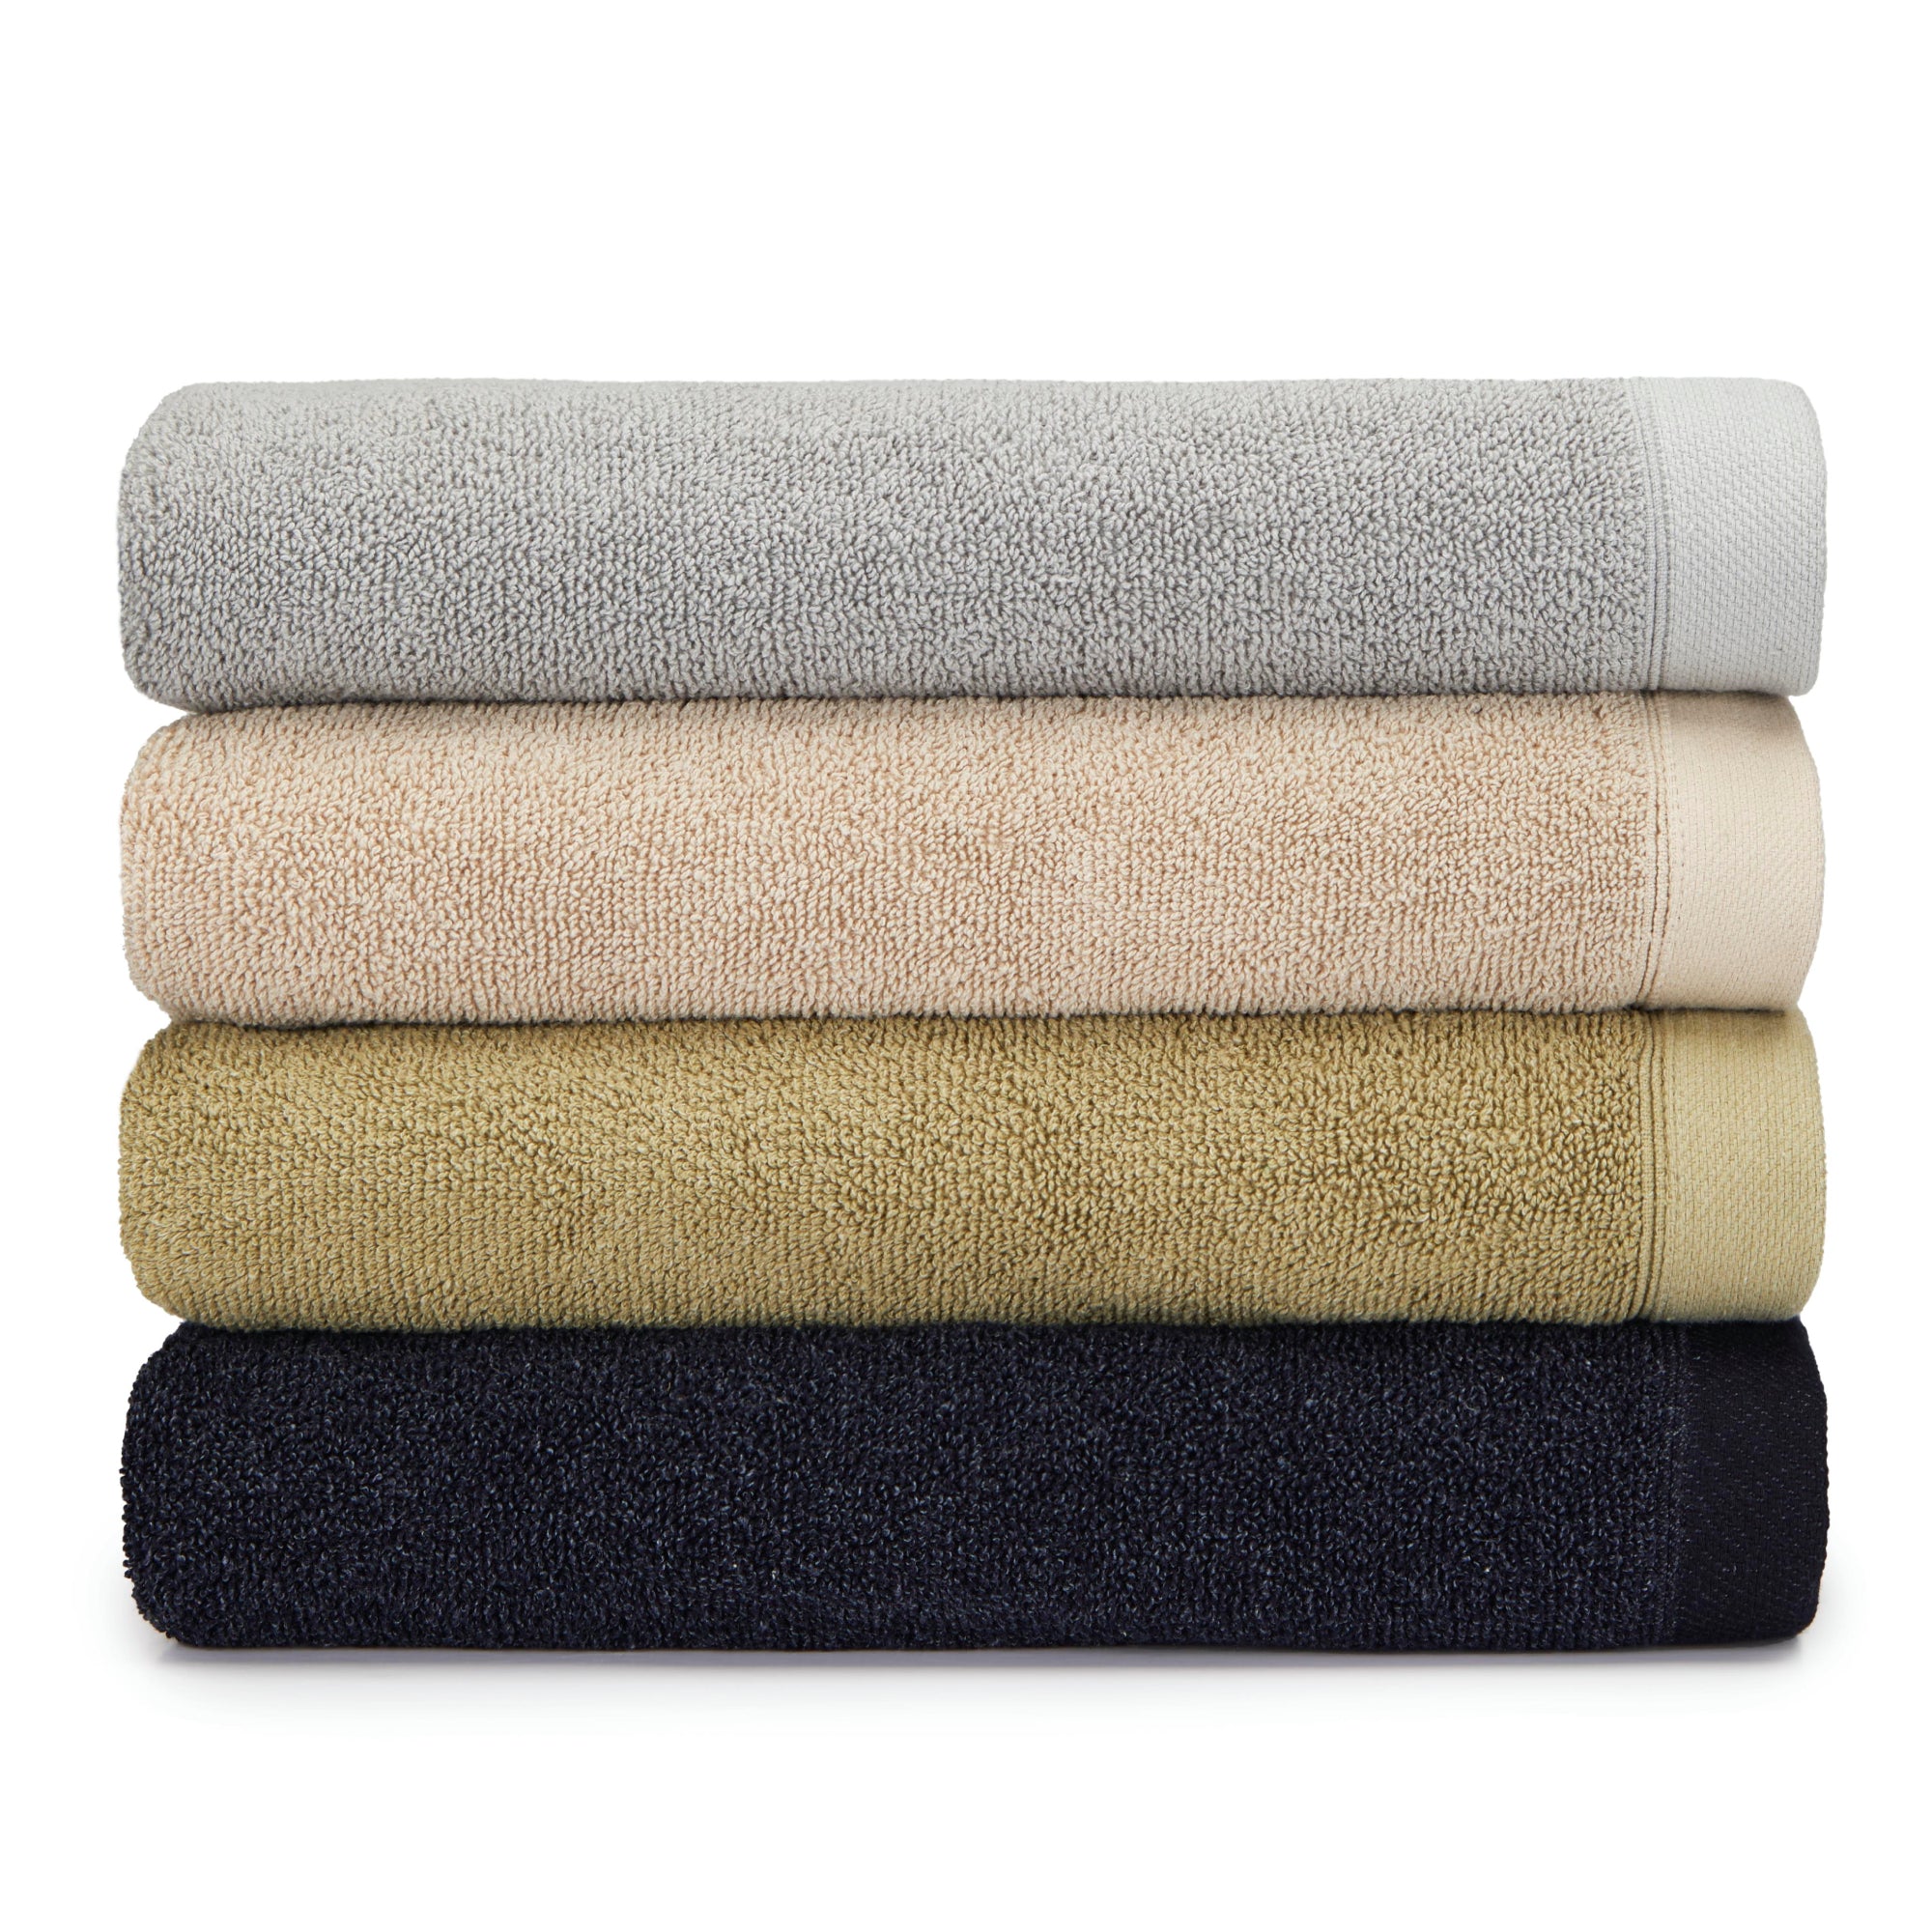 Abode Eco Towels and Bath Sheets by Drift Home in Grey